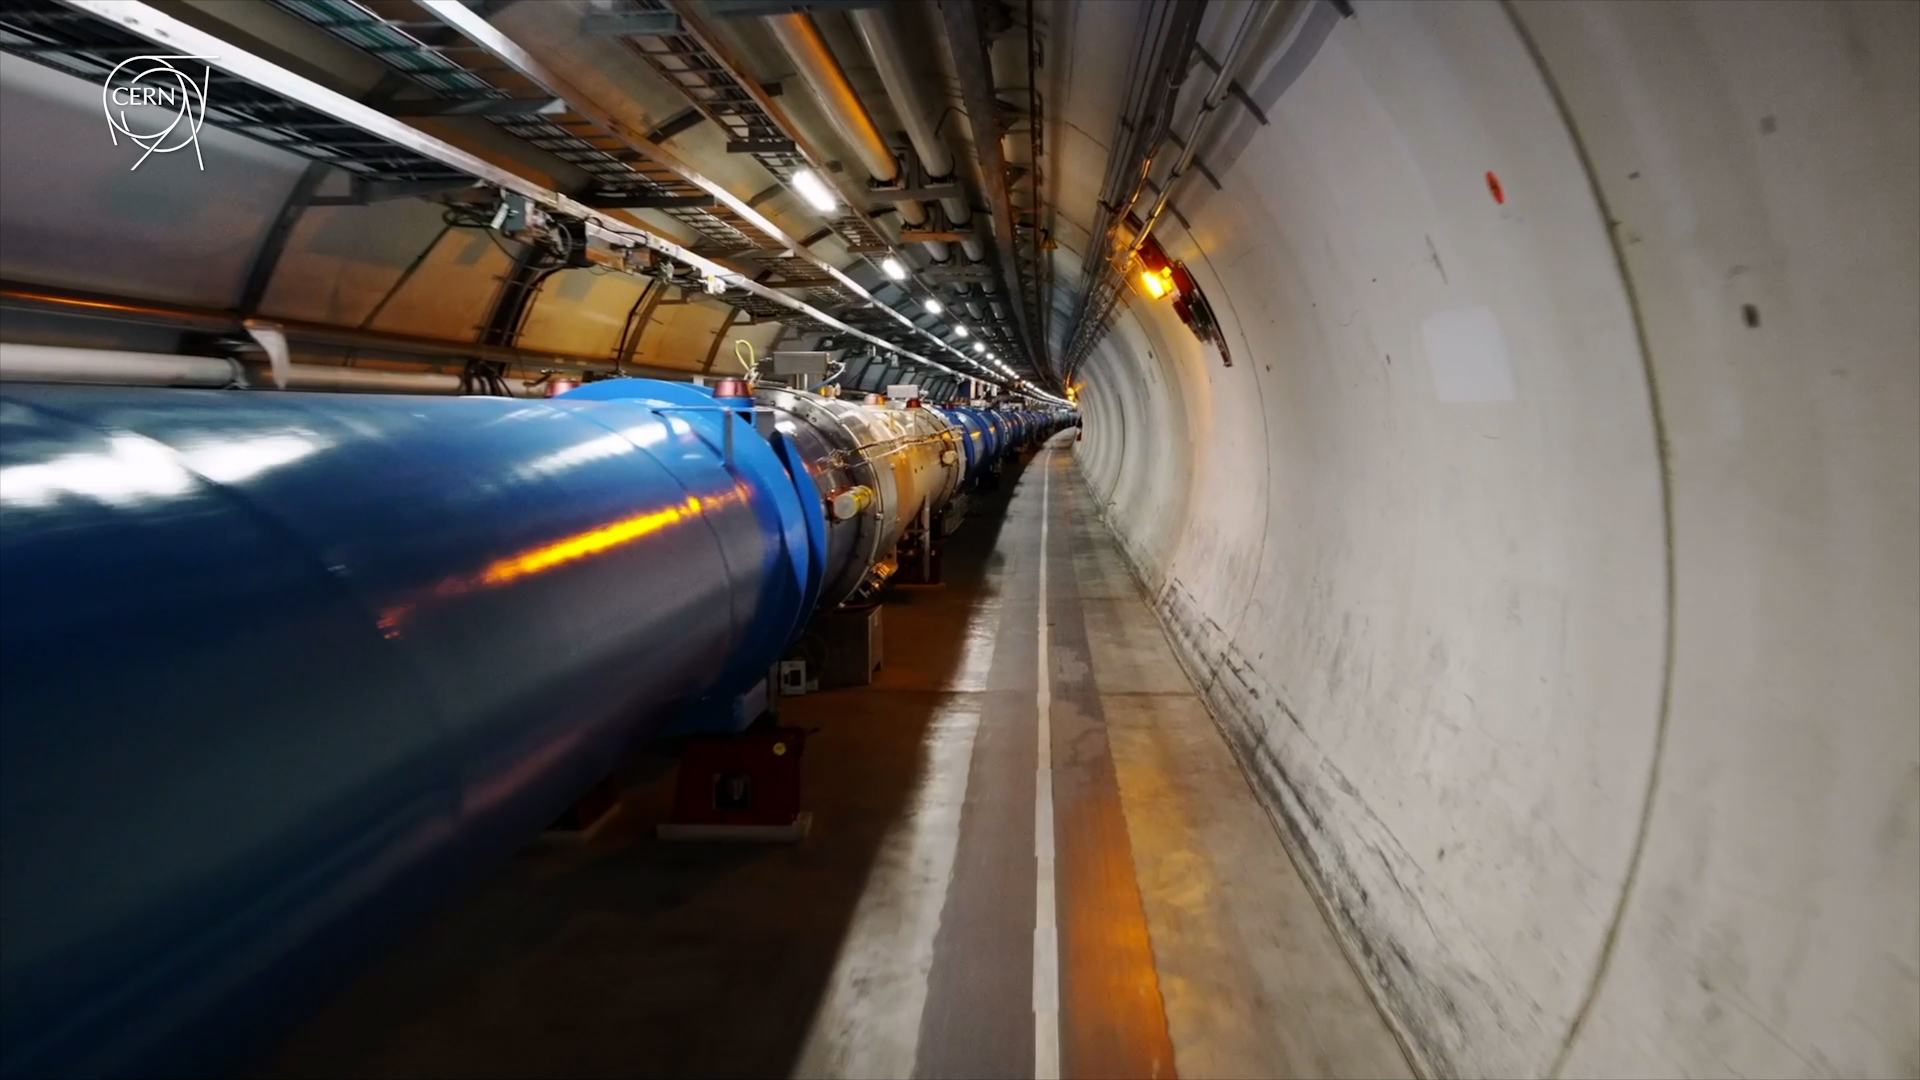 A section of the Large Hadron Collider at CERN. /CGTN